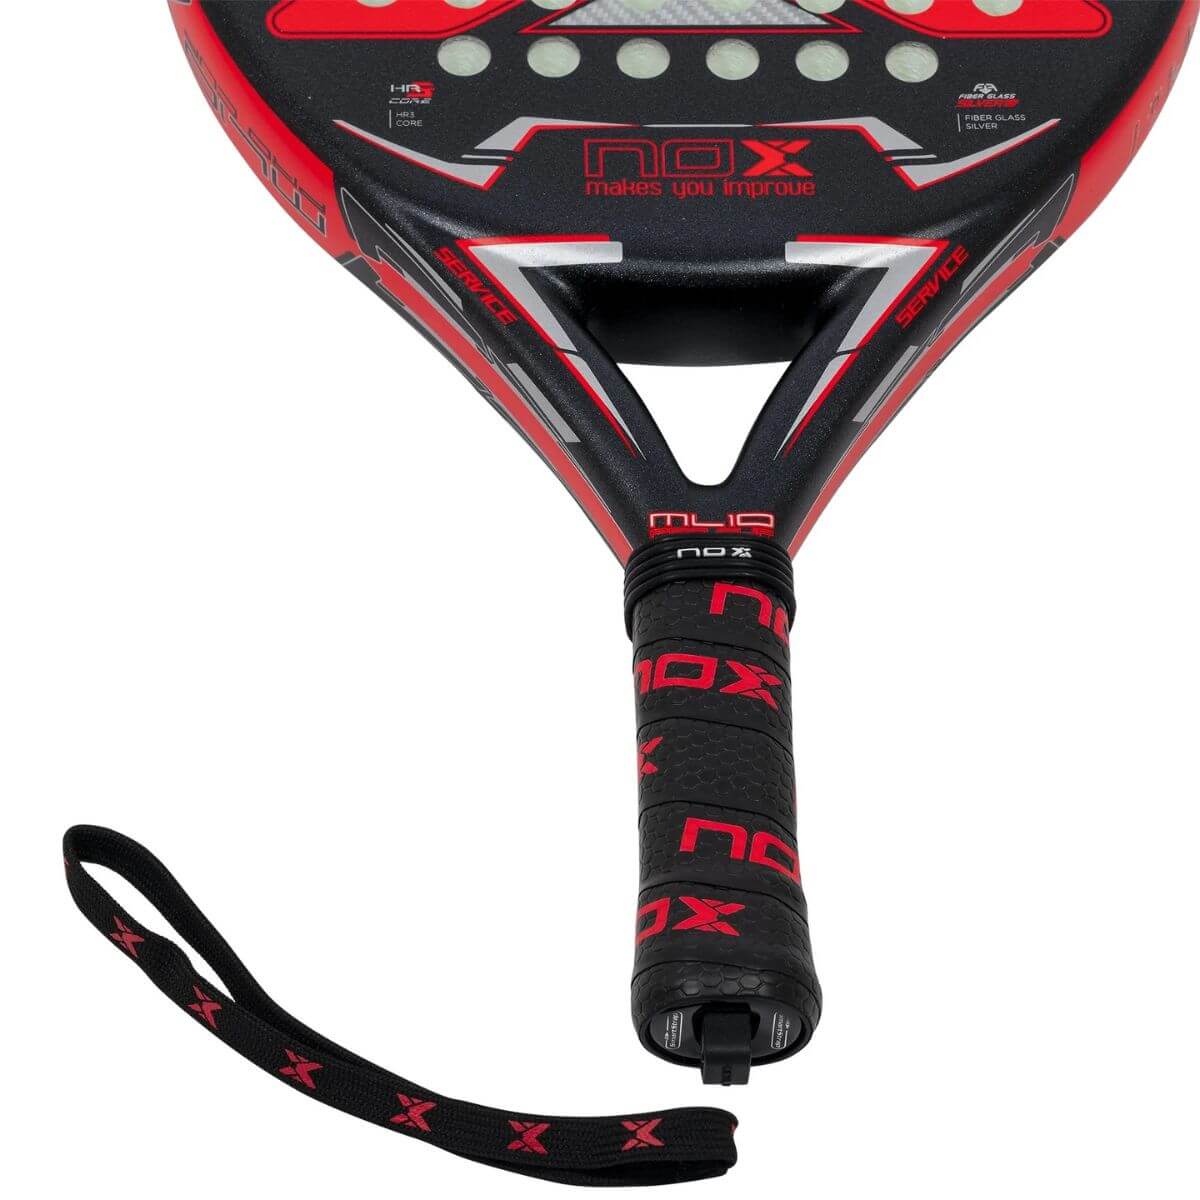 Pala Padel Nox ML10 Pro Cup Rough Surface Edition (360-375gr) – Set Point  Chile